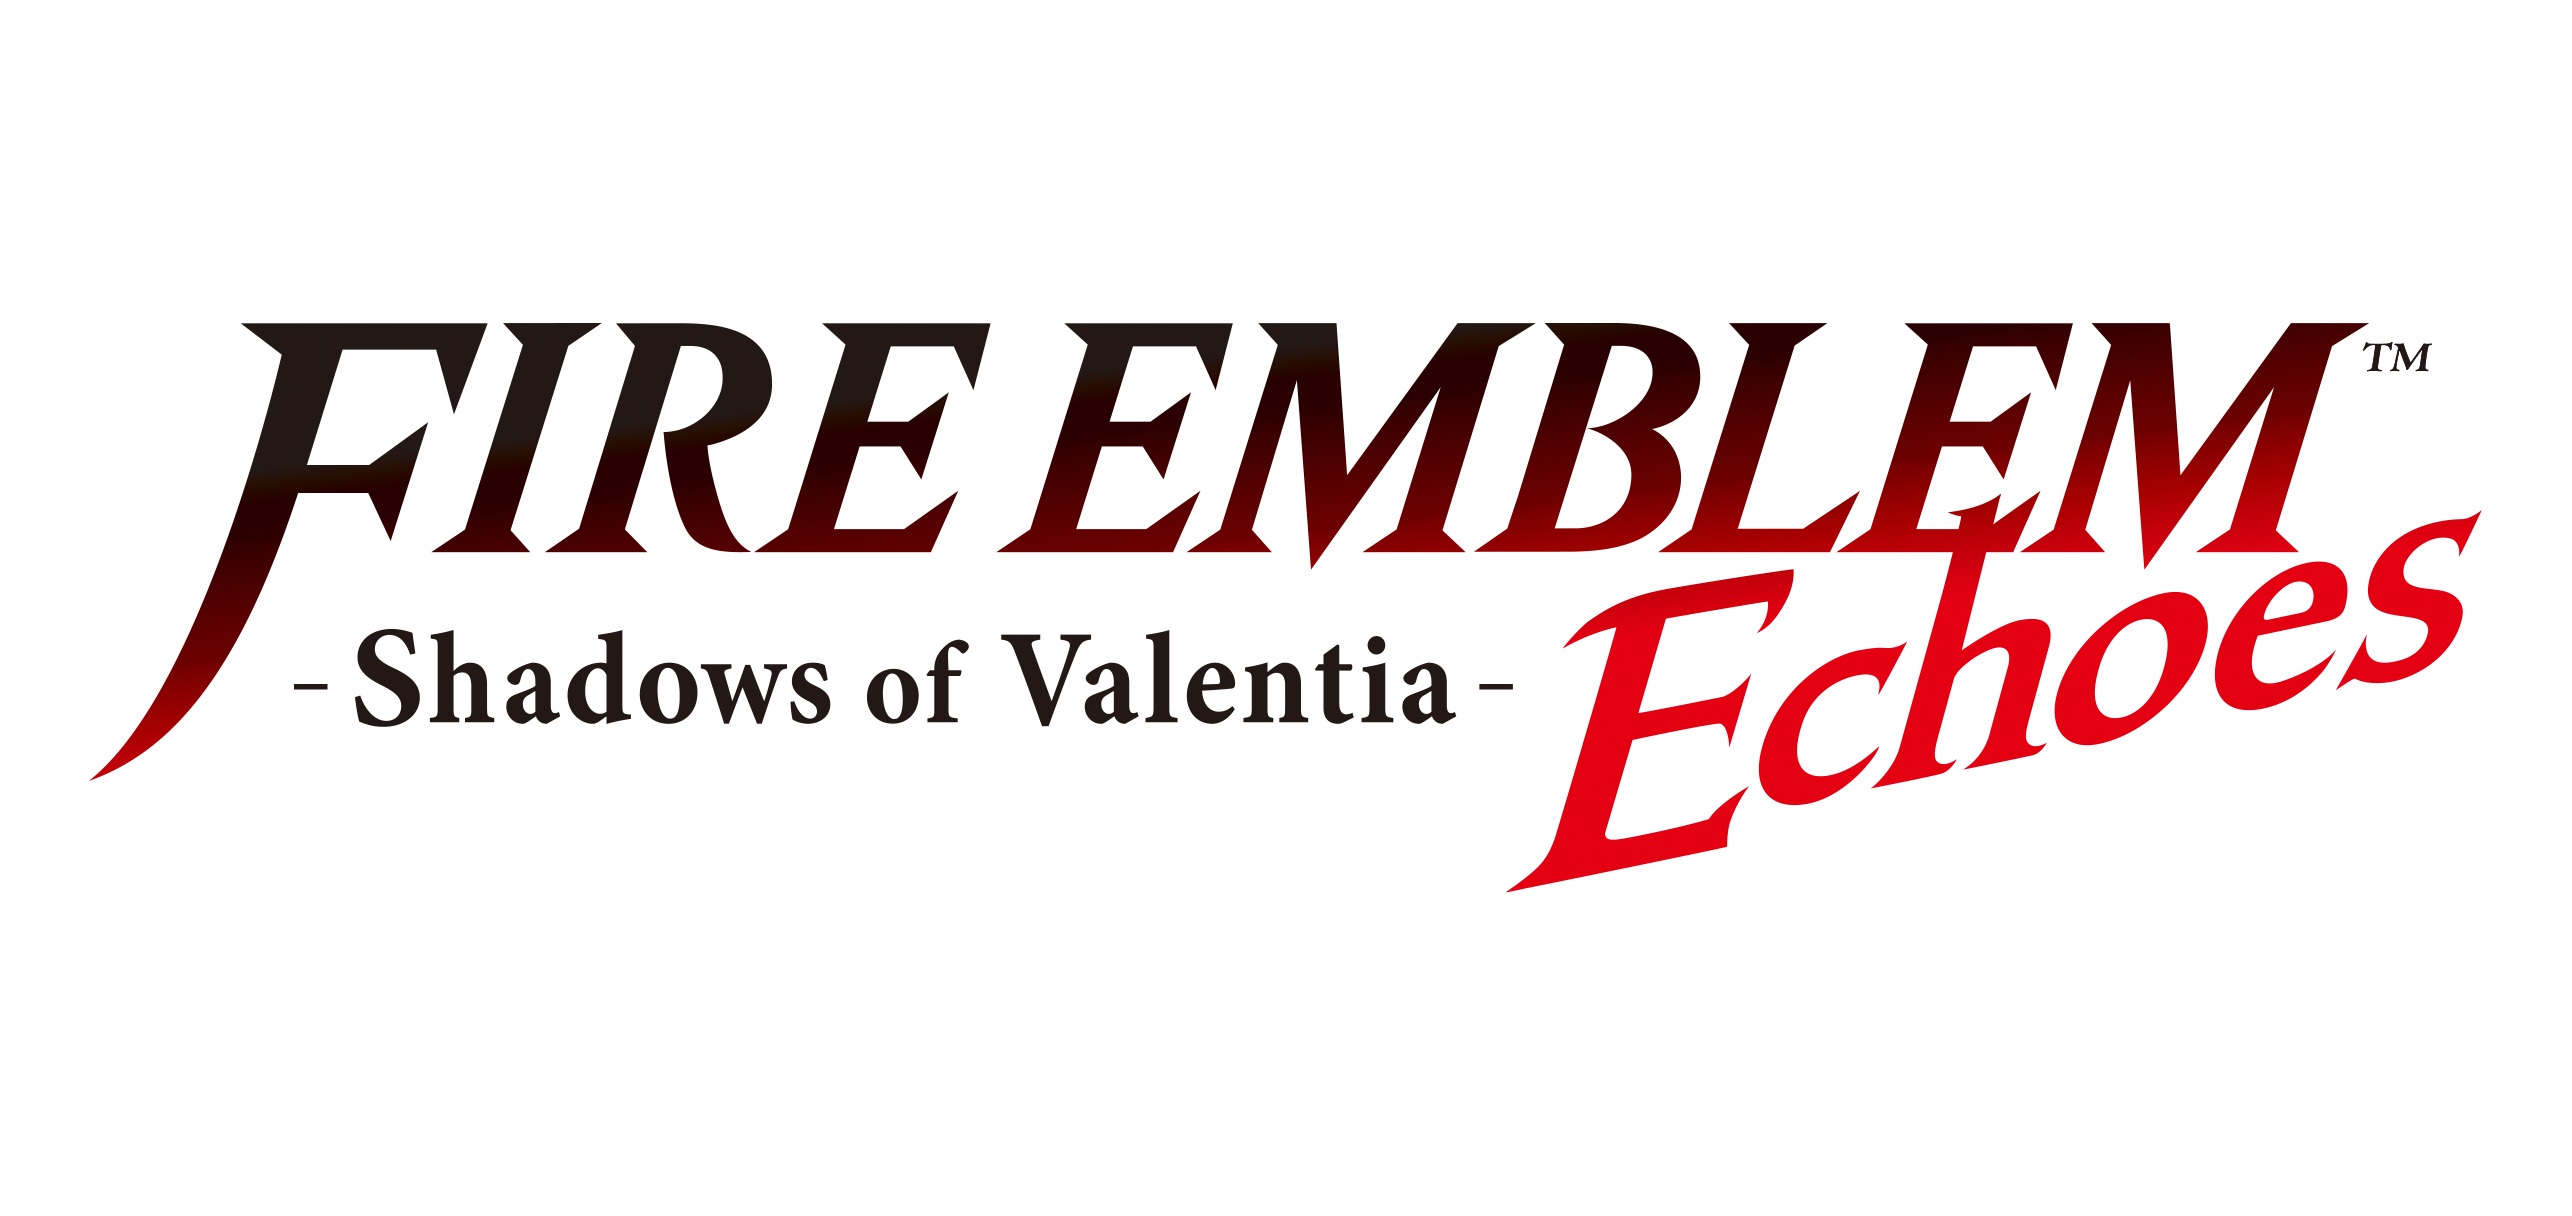 Video Game Fire Emblem Echoes: Shadows of Valentia HD Wallpaper | Background Image